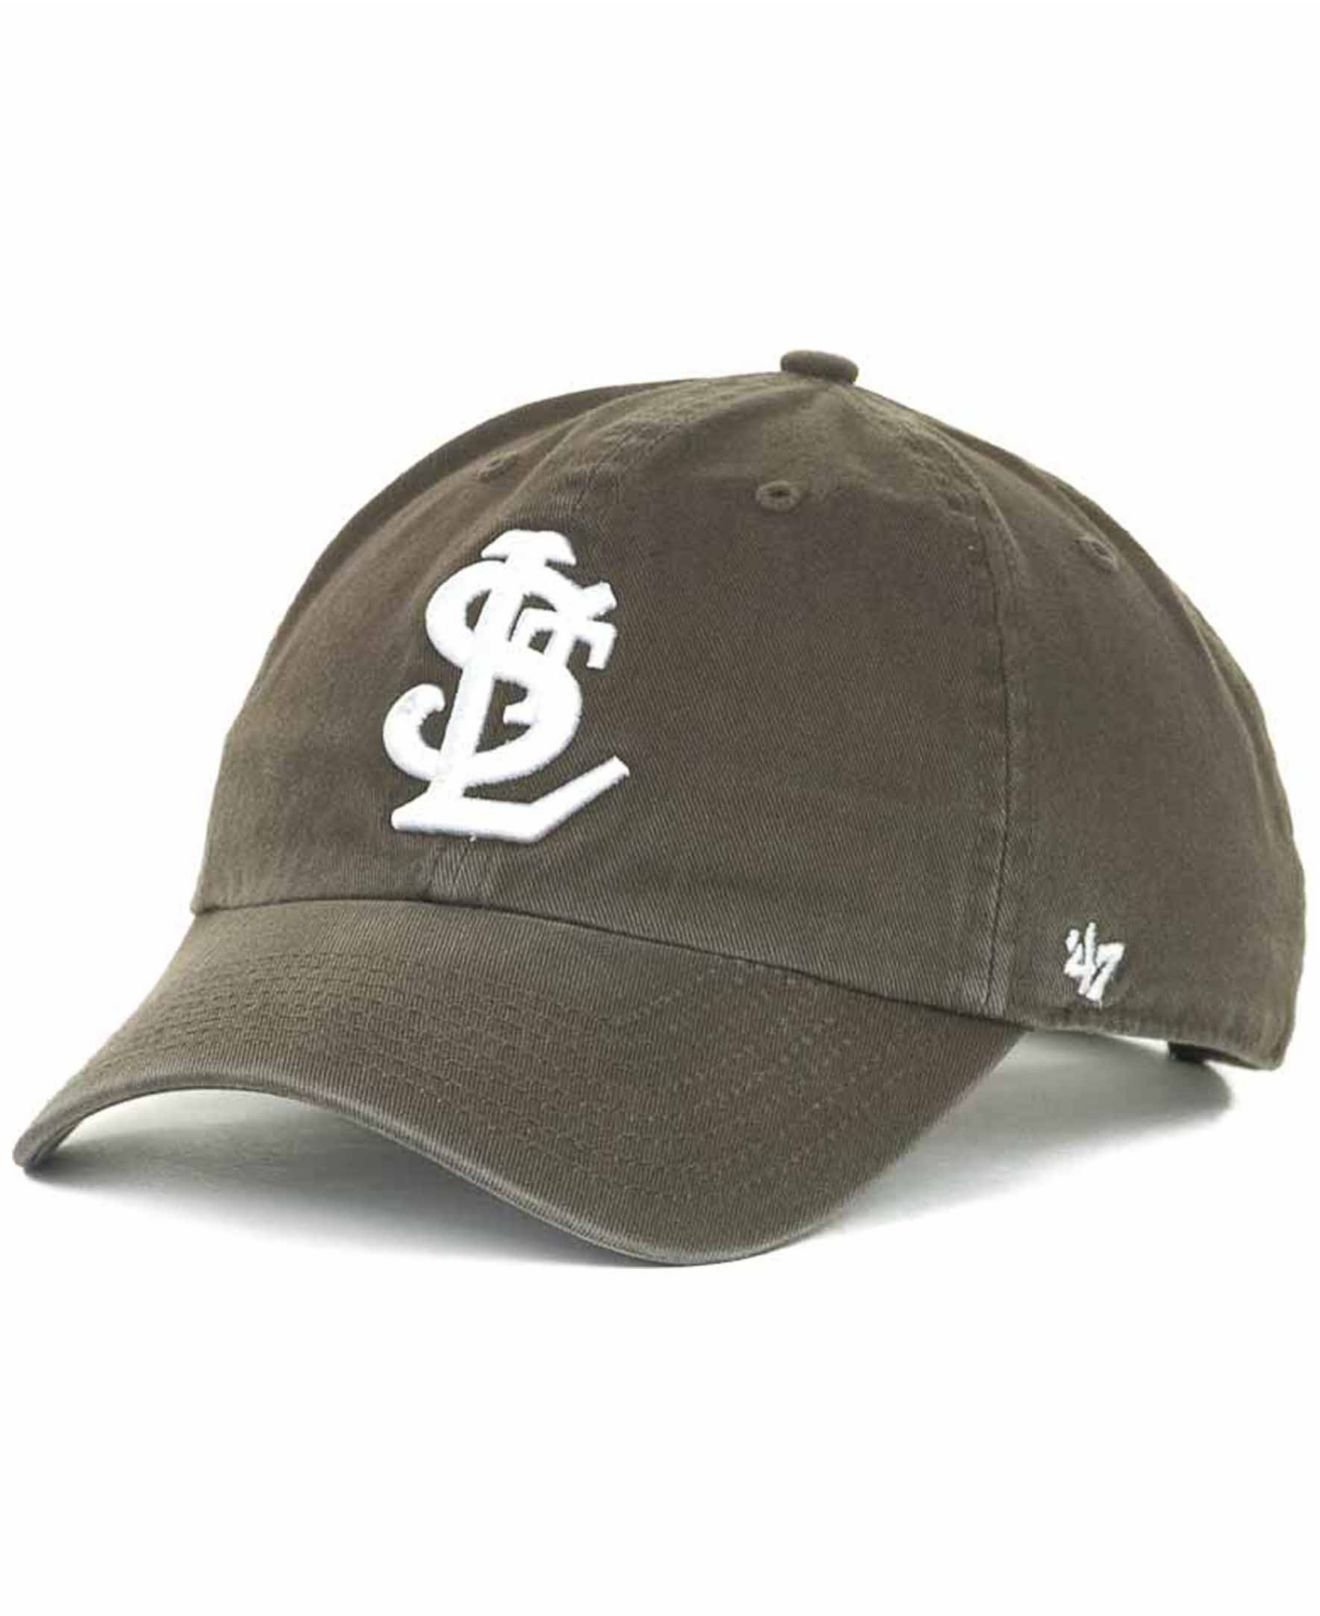 47 Brand St. Louis Browns Clean Up Hat for Men